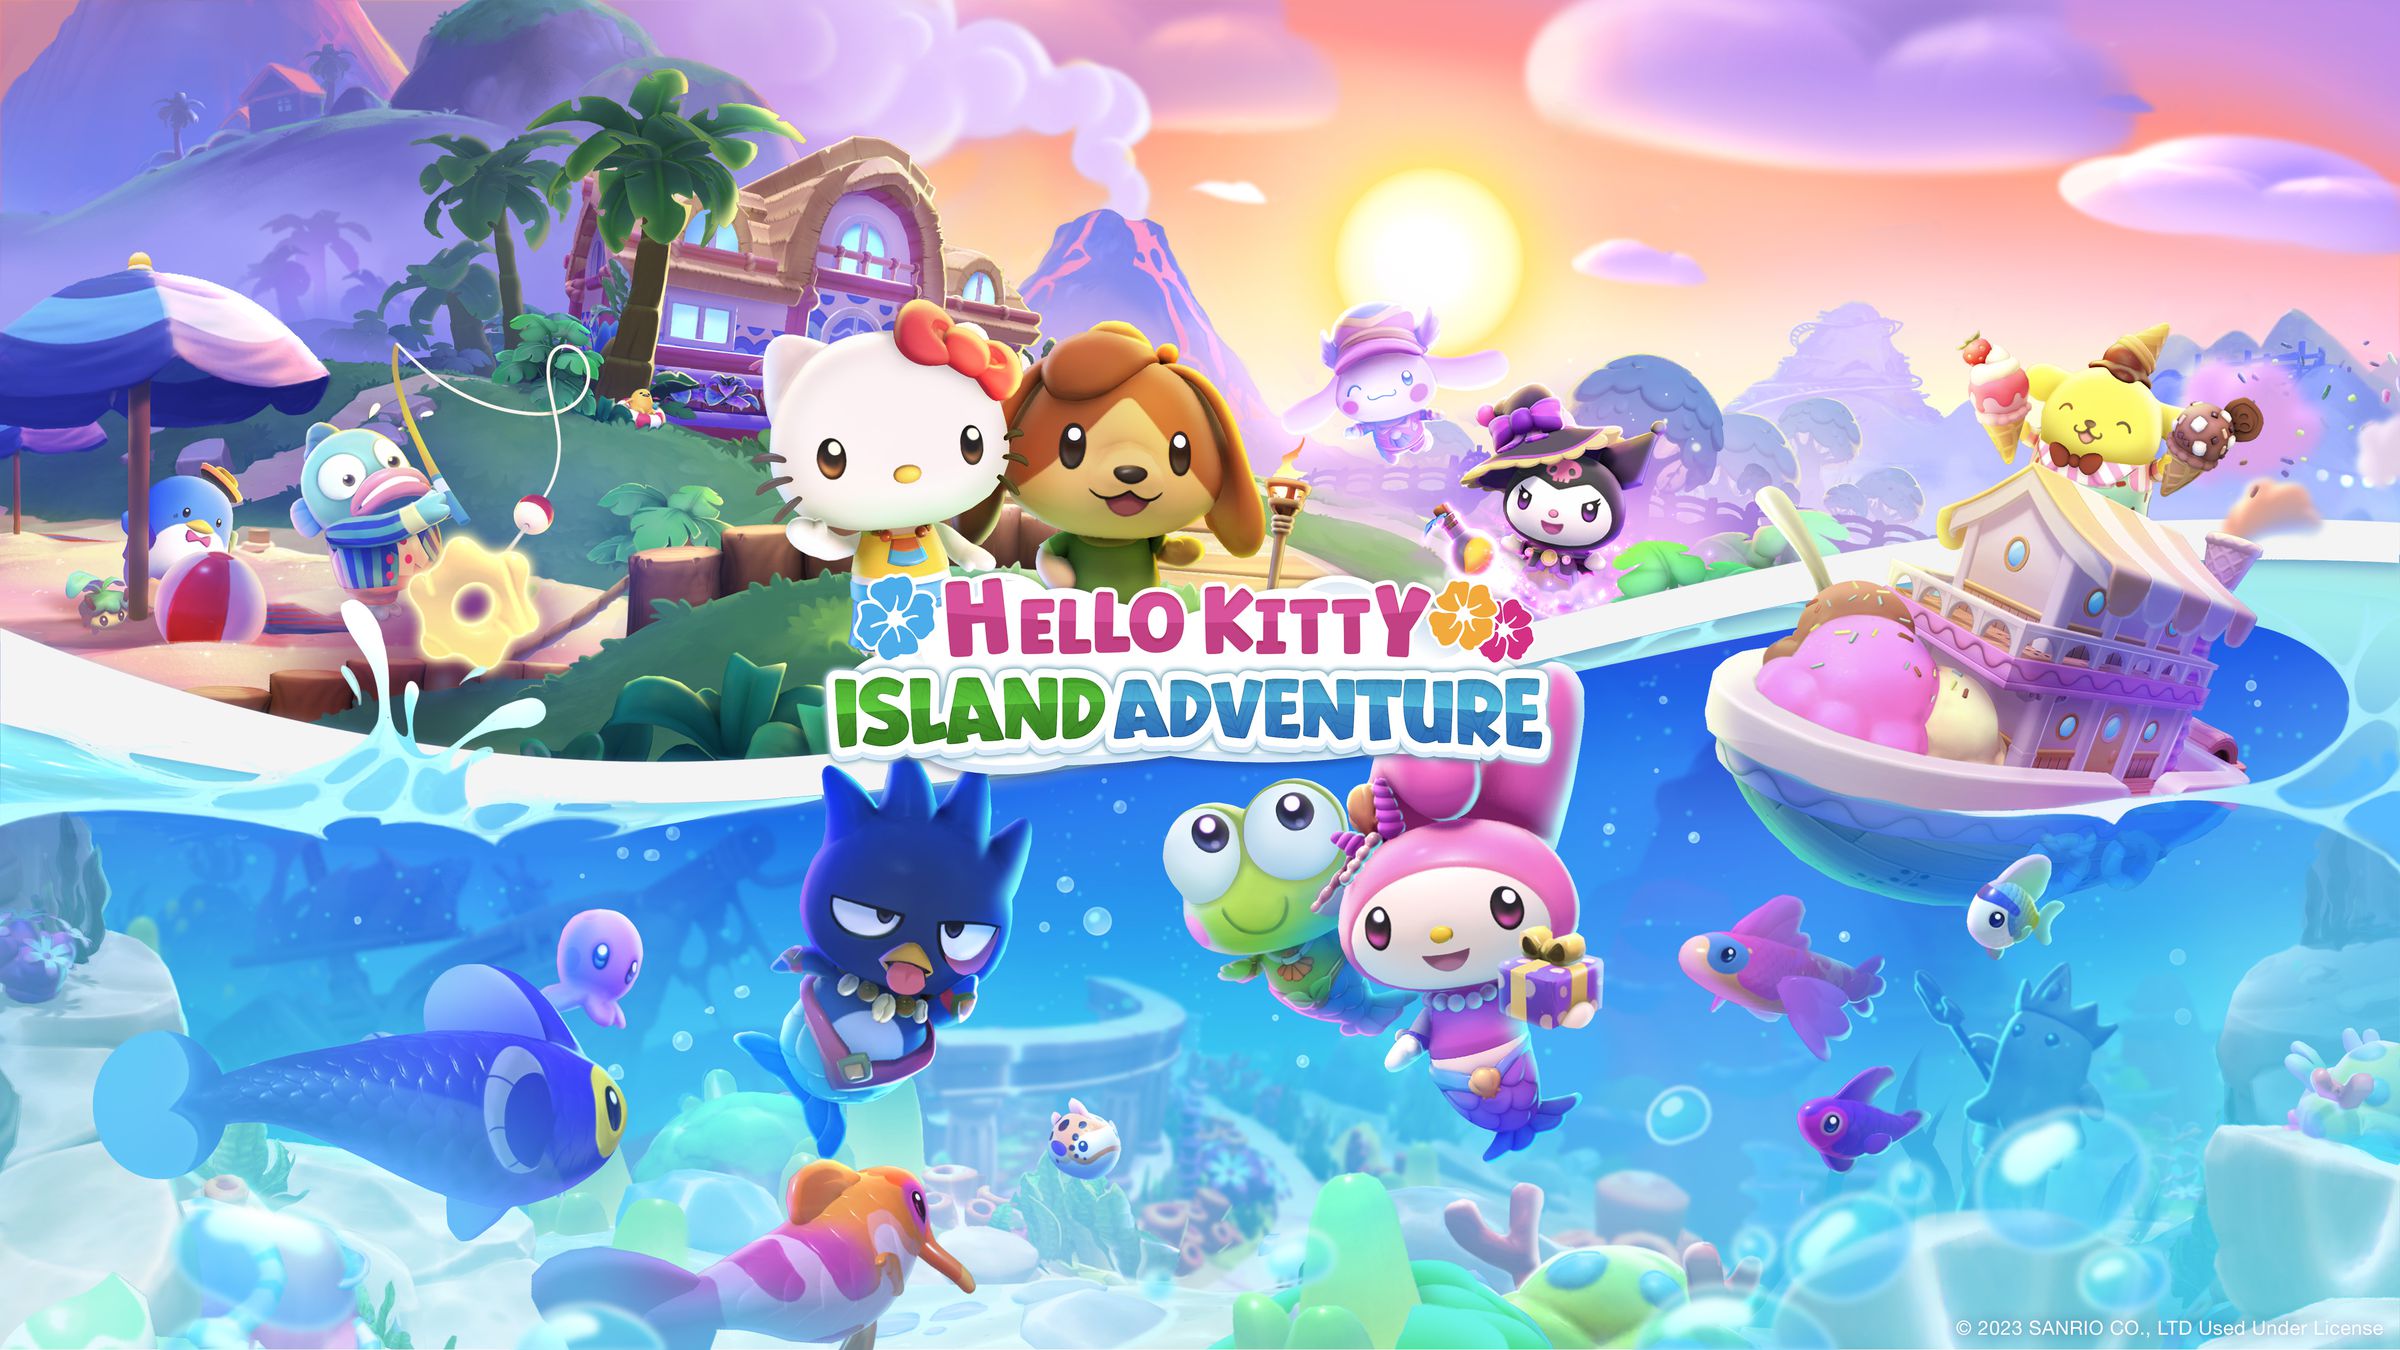 Key art from Hello Kitty Island Adventures featuring a collection of Hello Kitty characters exploring a tropical island